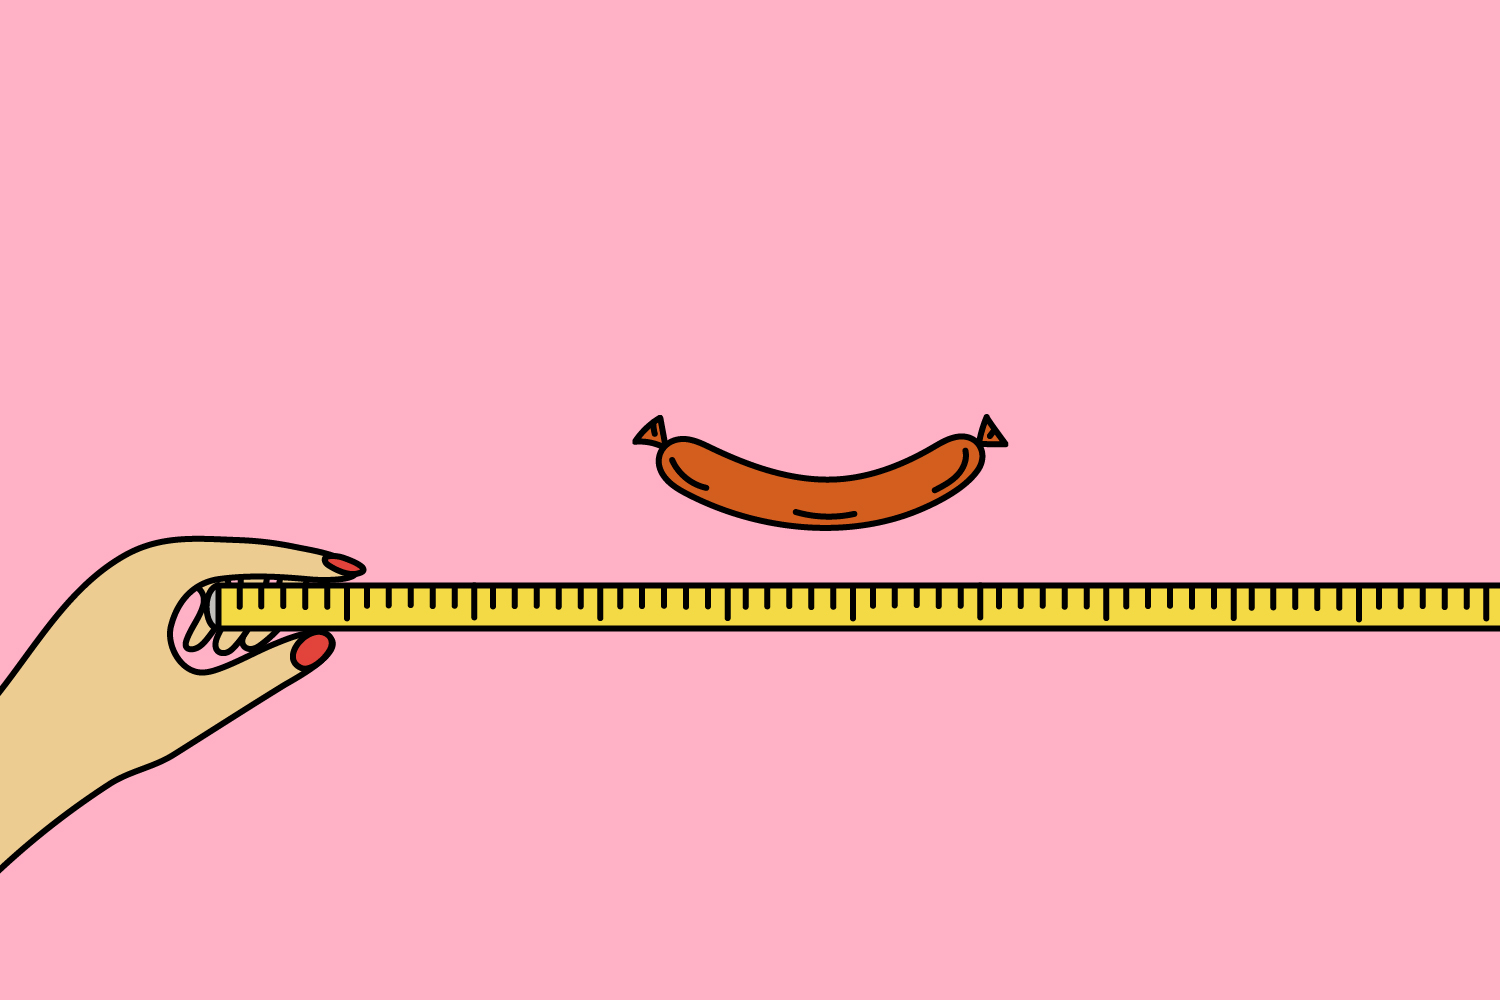 Why Are We Still Talking About Penis Size?